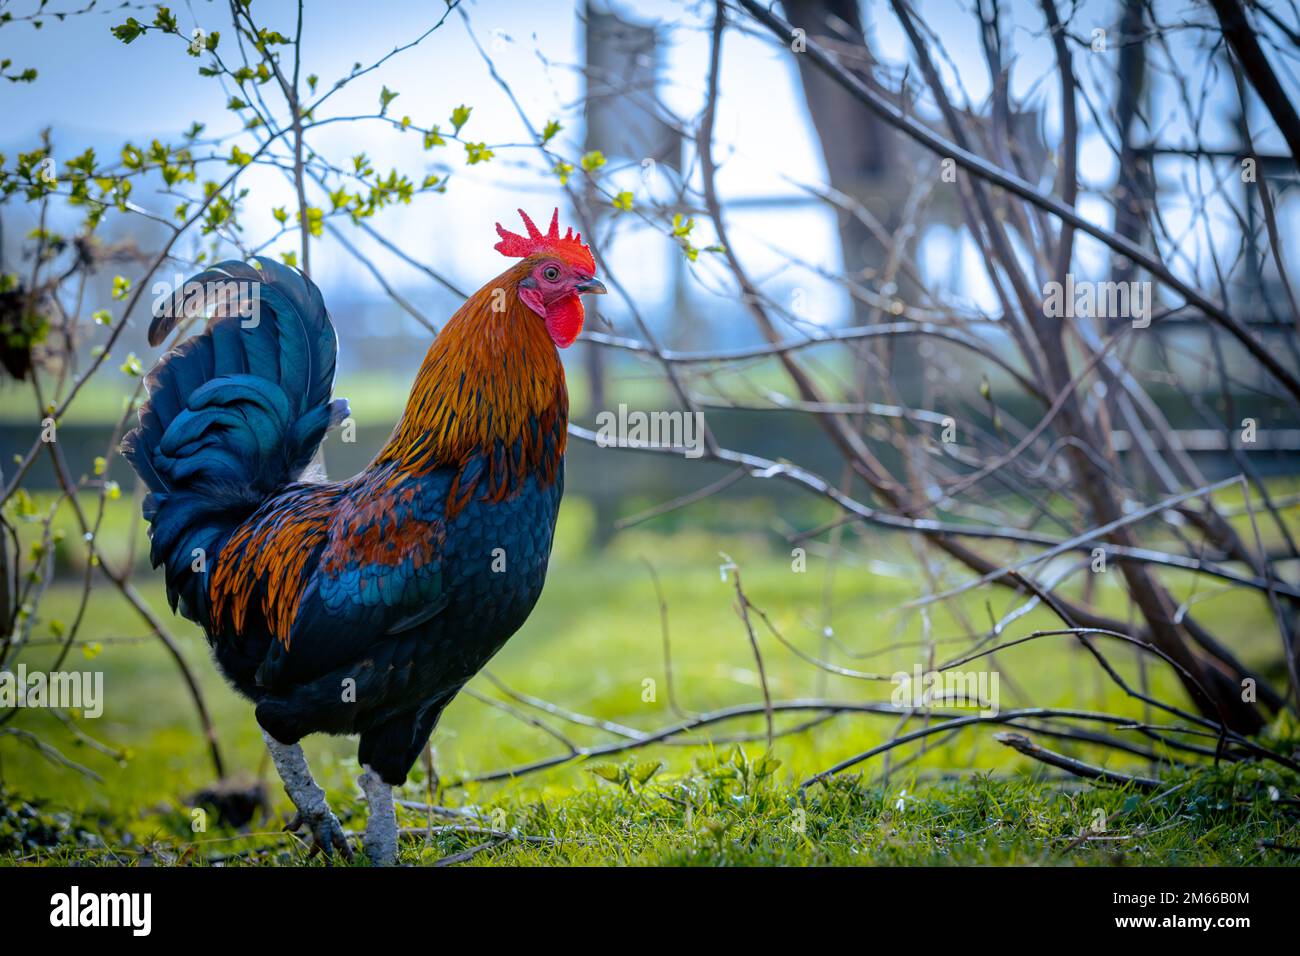 hen rooster background selective focus background blur Stock Photo